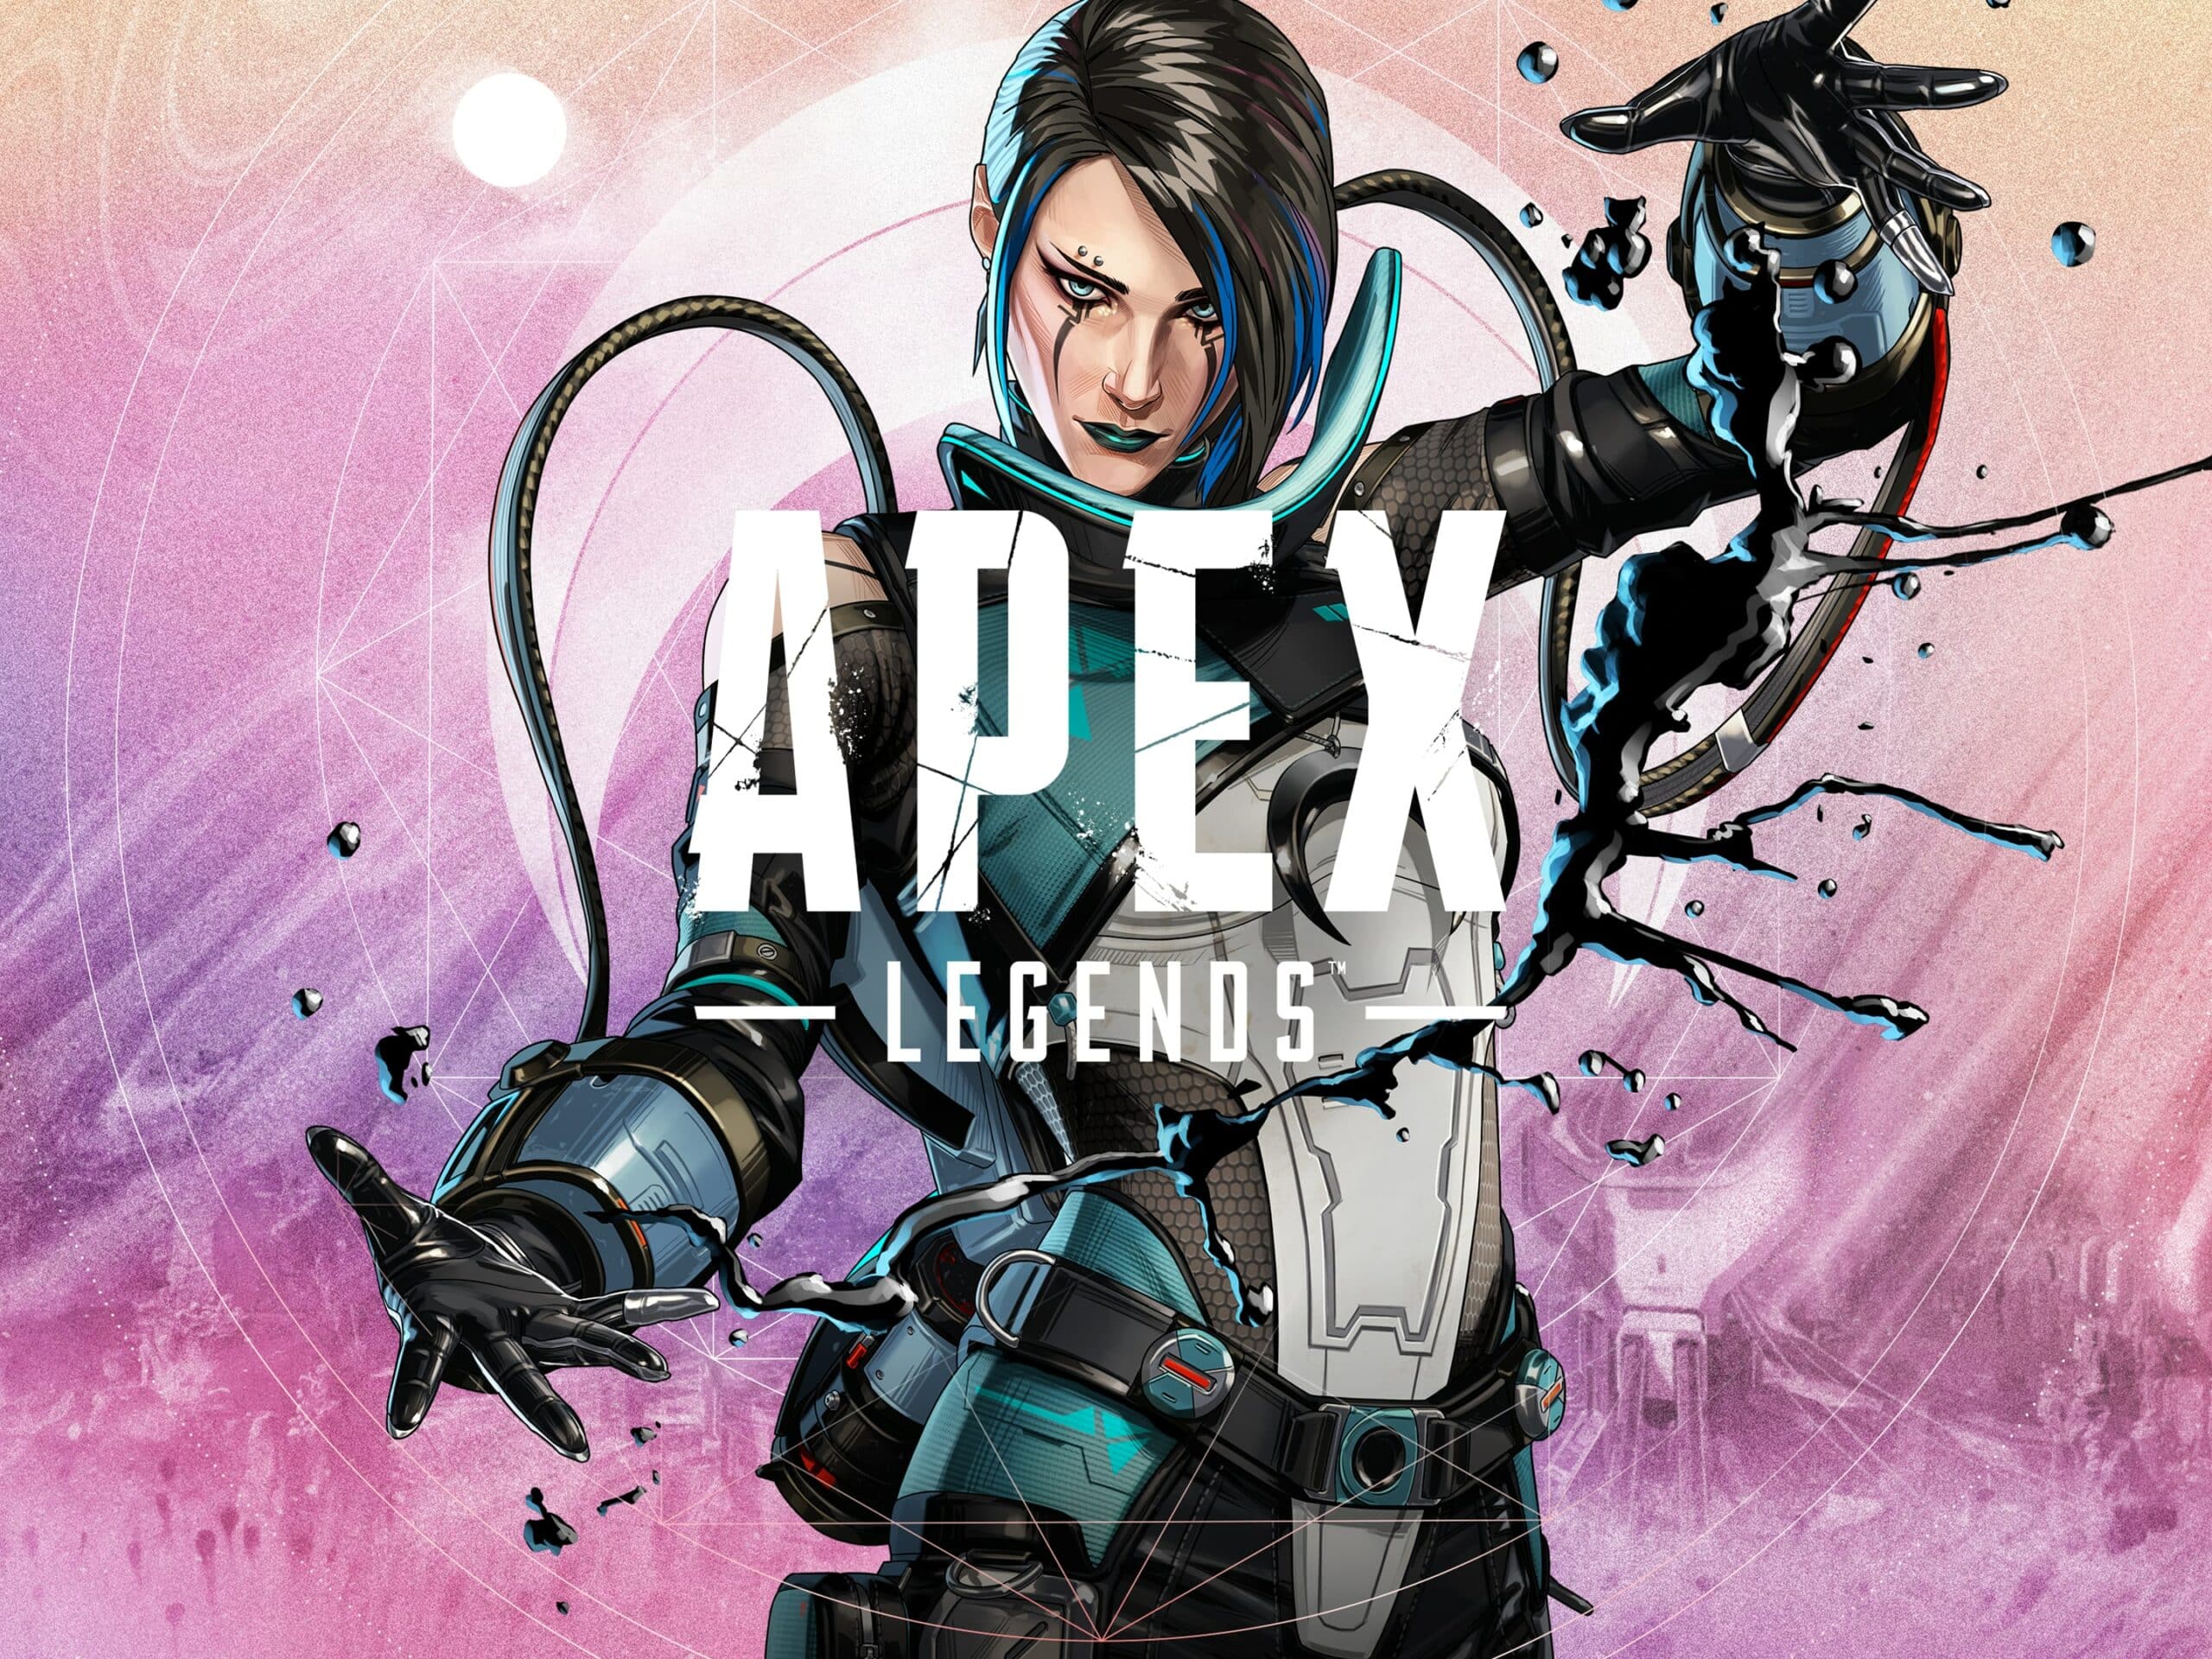 Respawn to Sunset Apex Legends Mobile Without Refunds